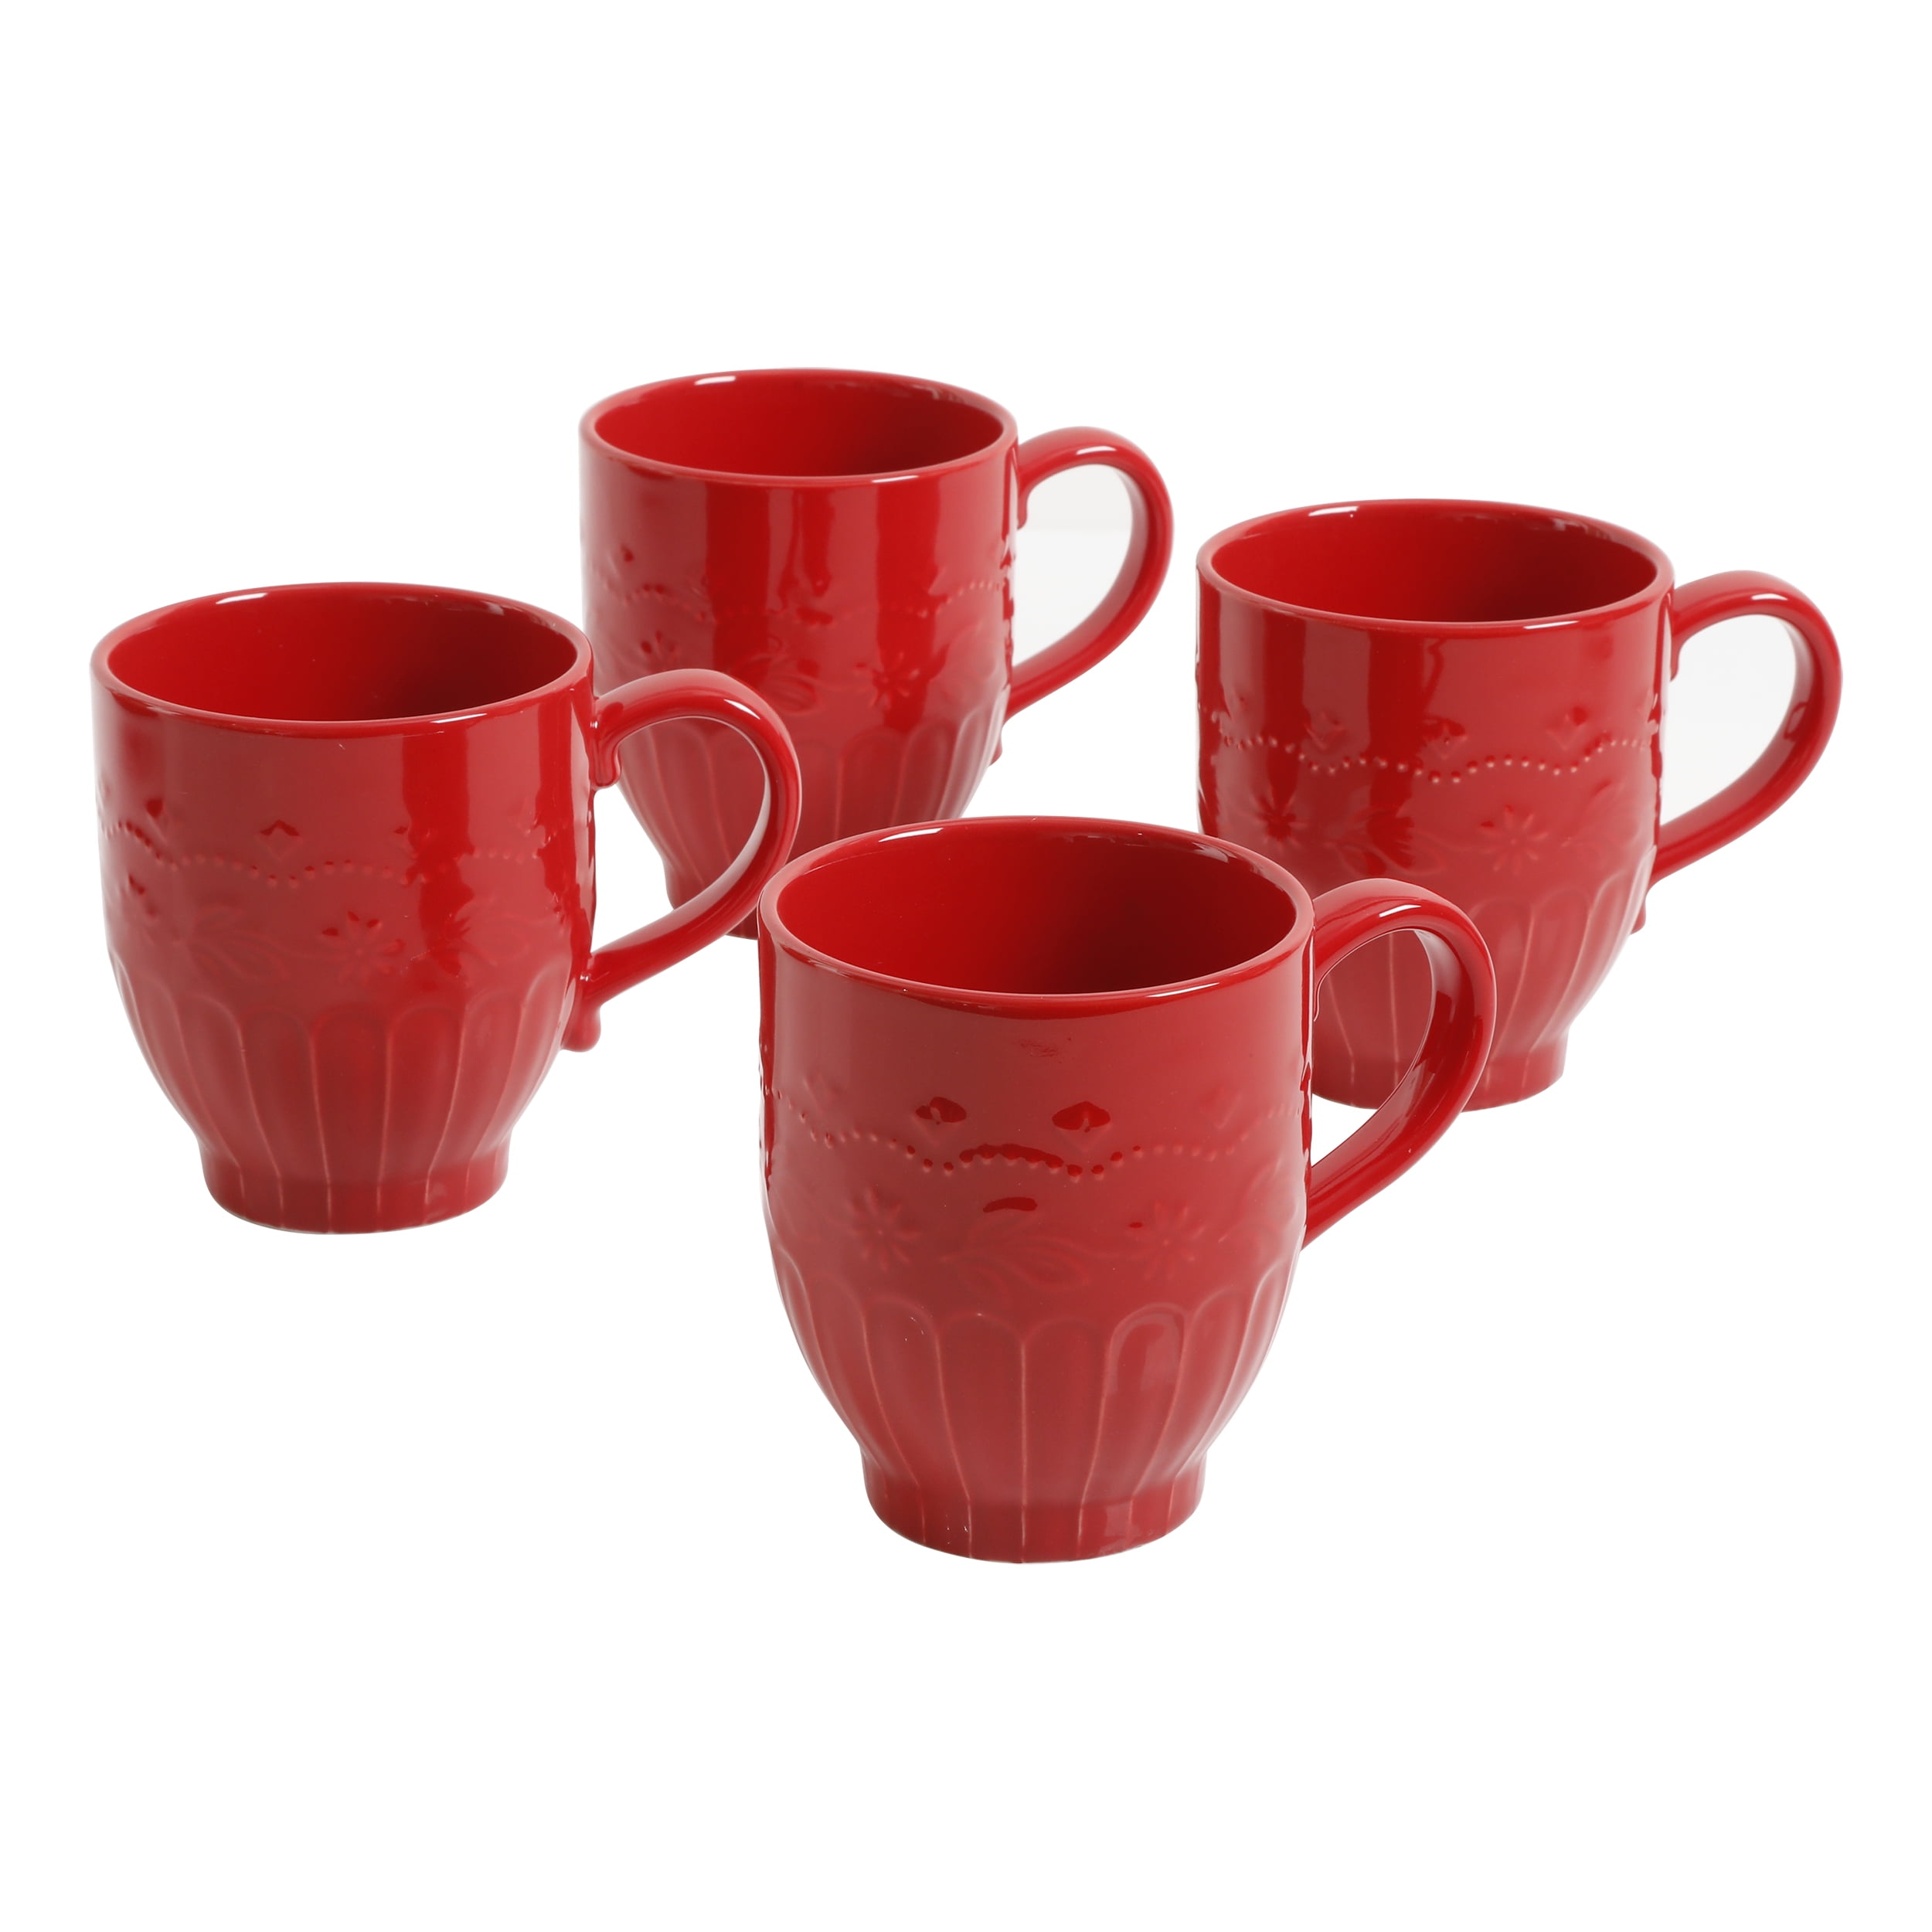 Coca-Cola Classic 4 Piece Red and White Stoneware Mug Set - 21 oz -  Microwave and Dishwasher Safe in the Drinkware department at